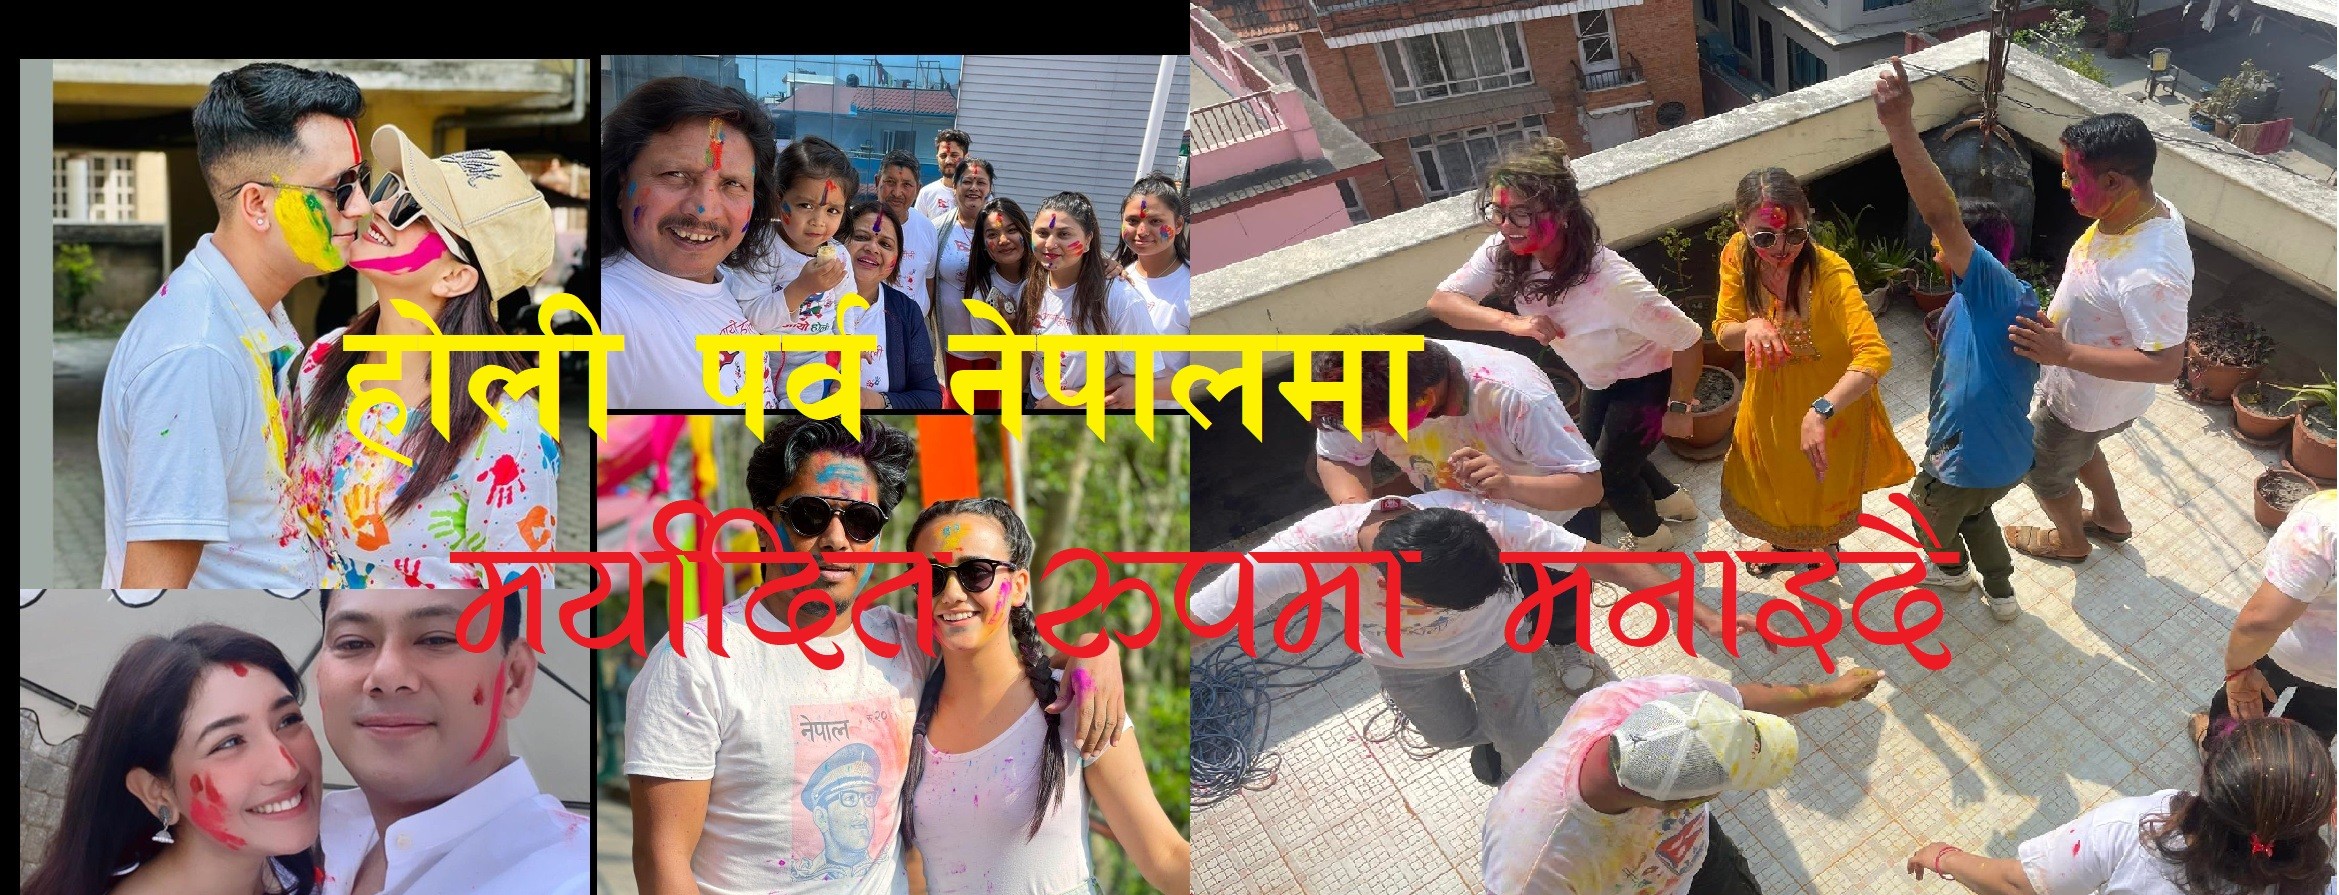 Holi Celebration is becoming more modest in Nepal